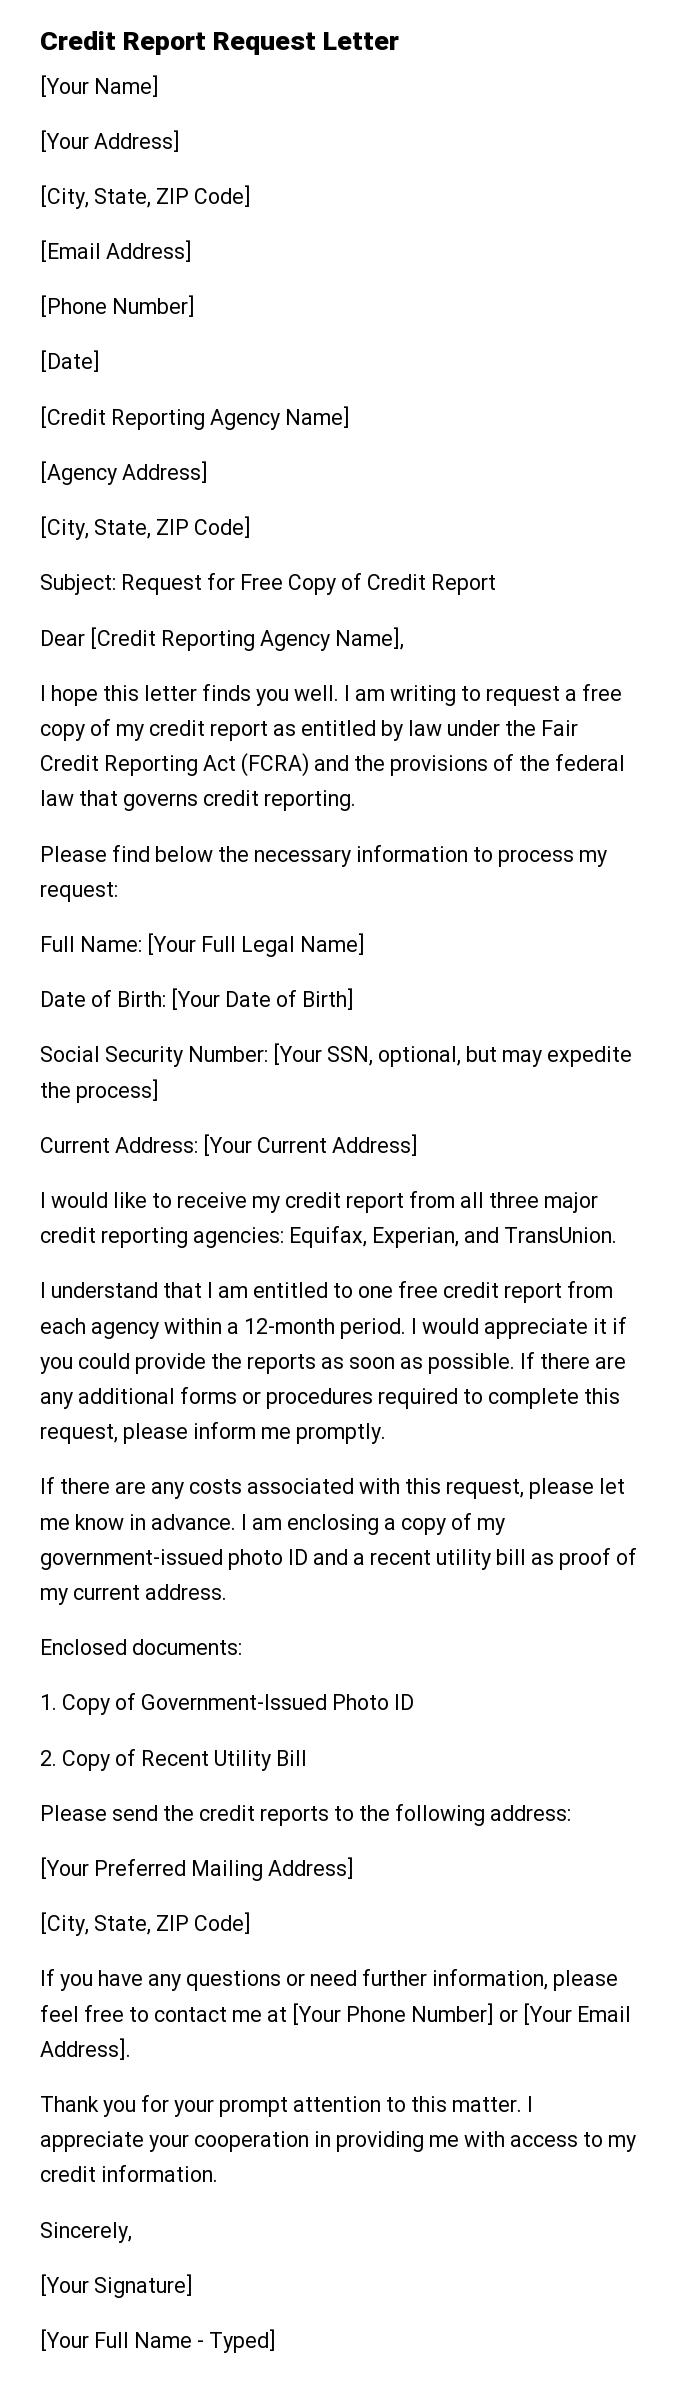 Credit Report Request Letter